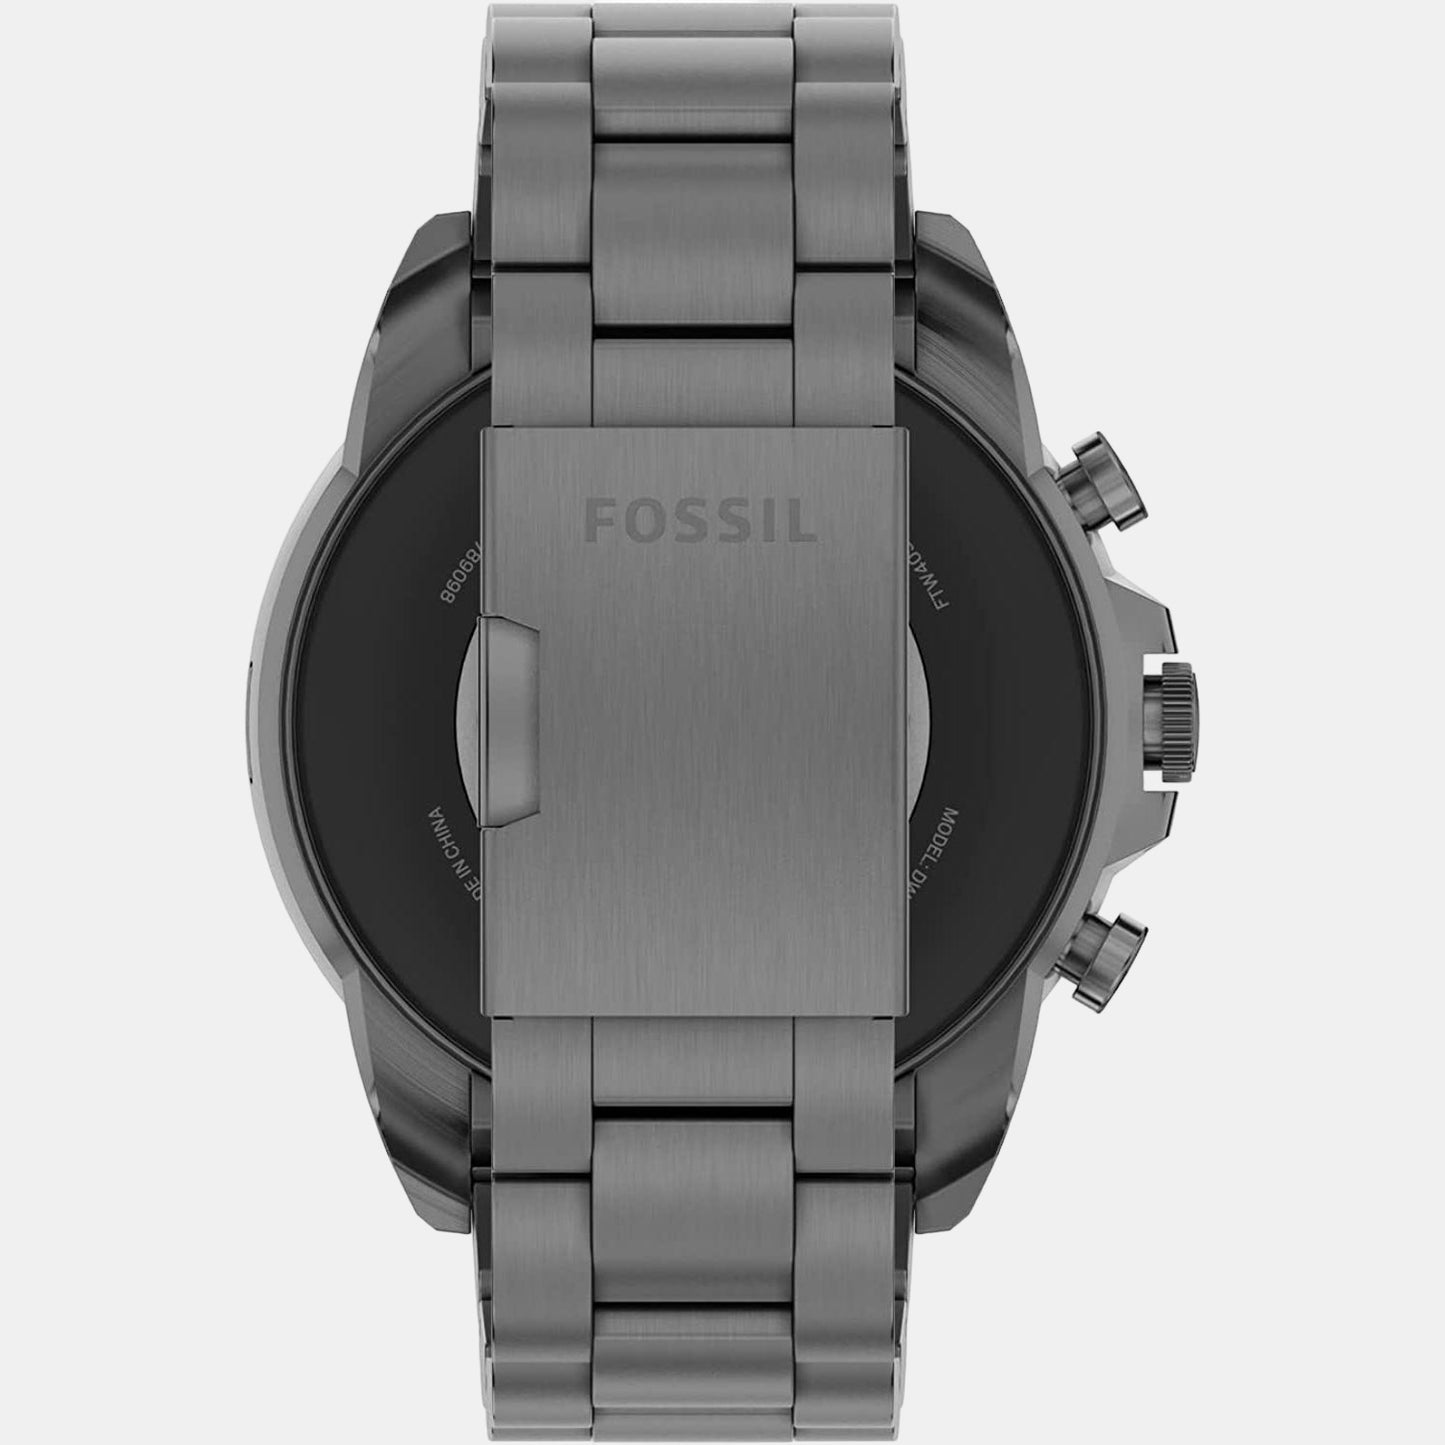 fossil-full-color-display-analog-men-watch-ftw4059